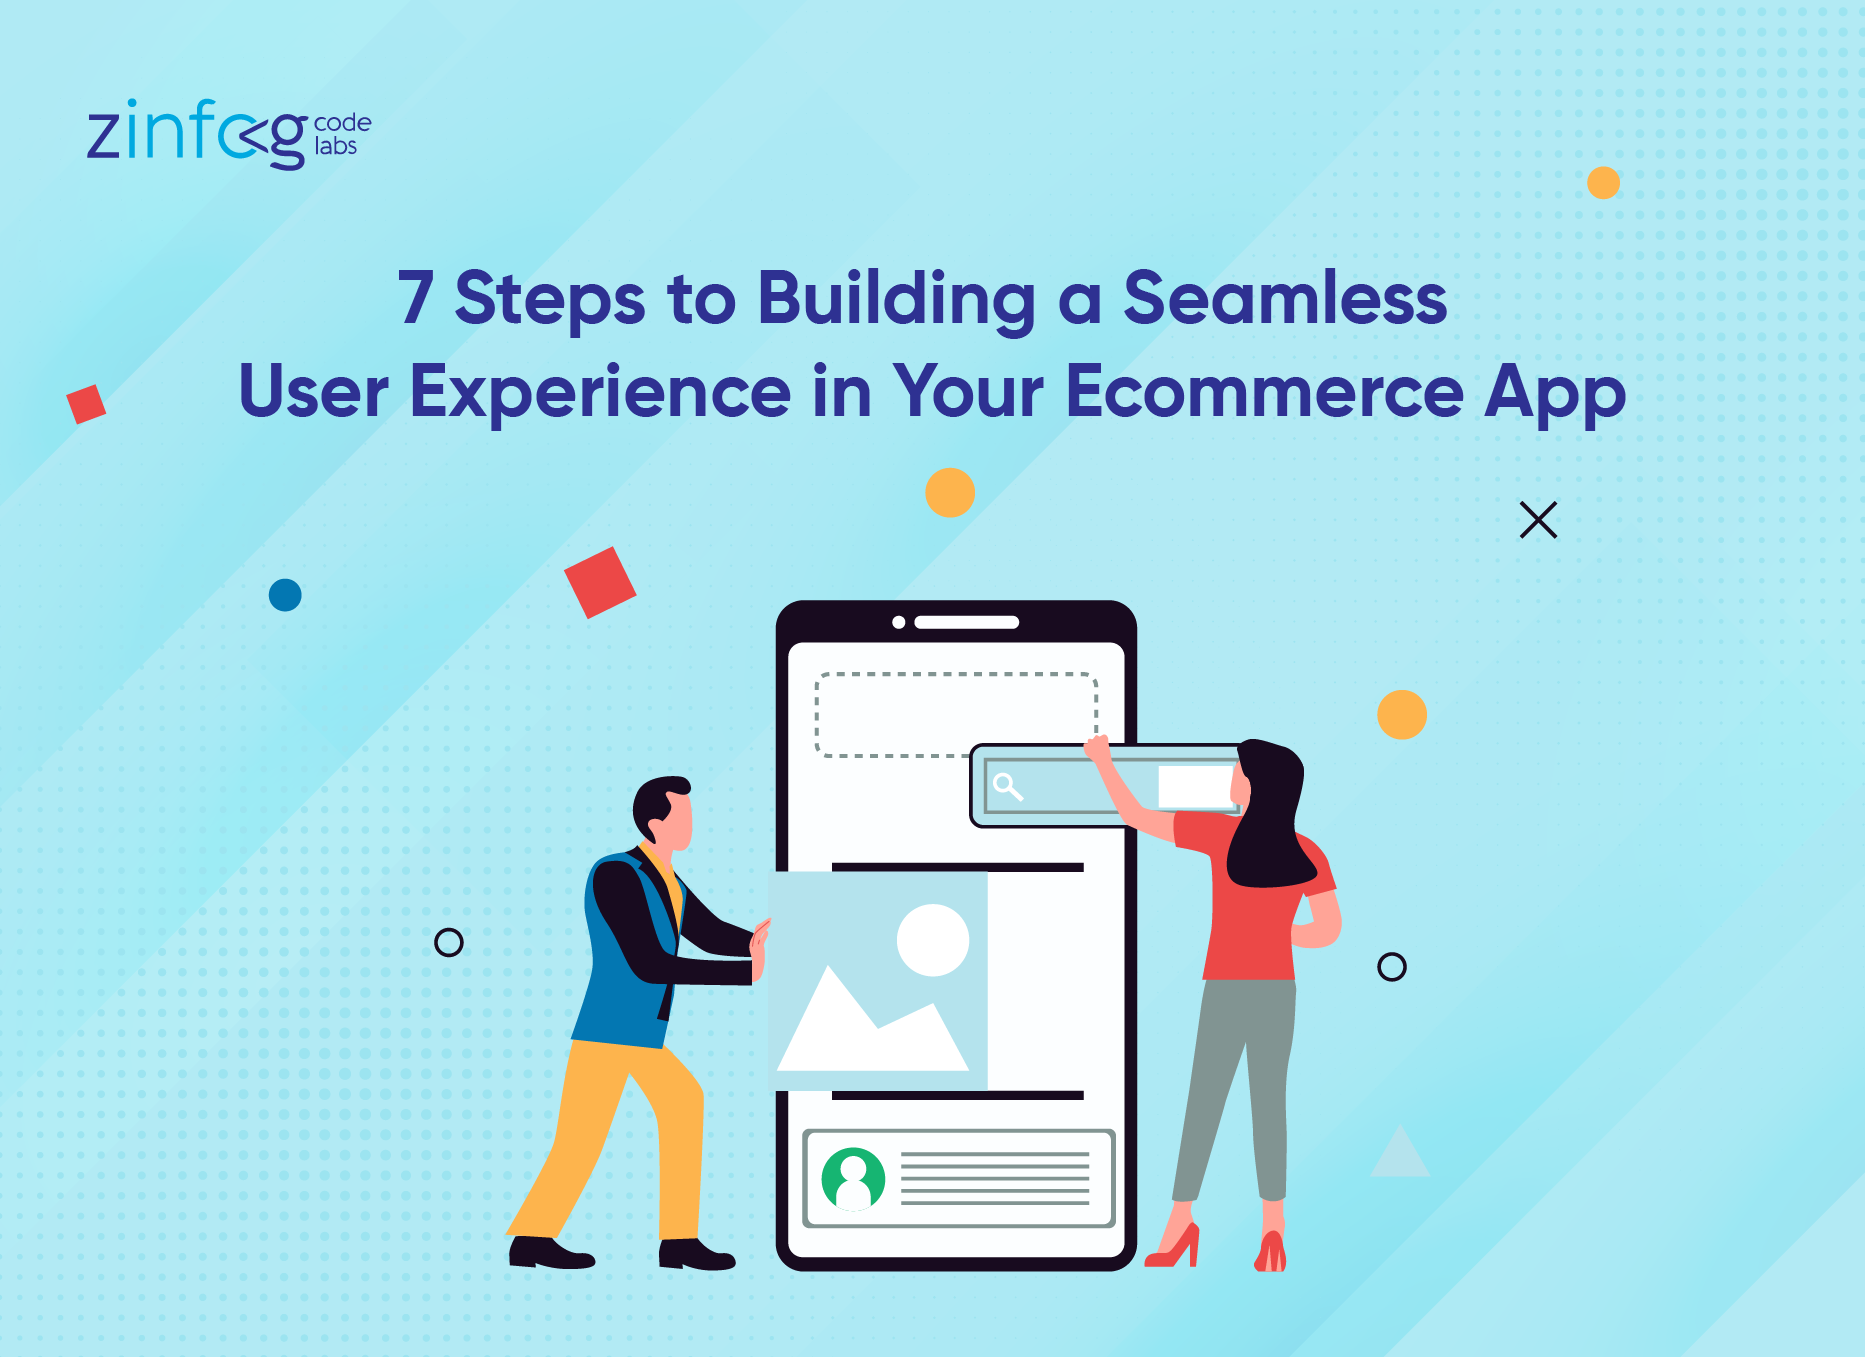 7-steps-to-building-a-seamless-user-experience-in-your-ecommerce-app.html